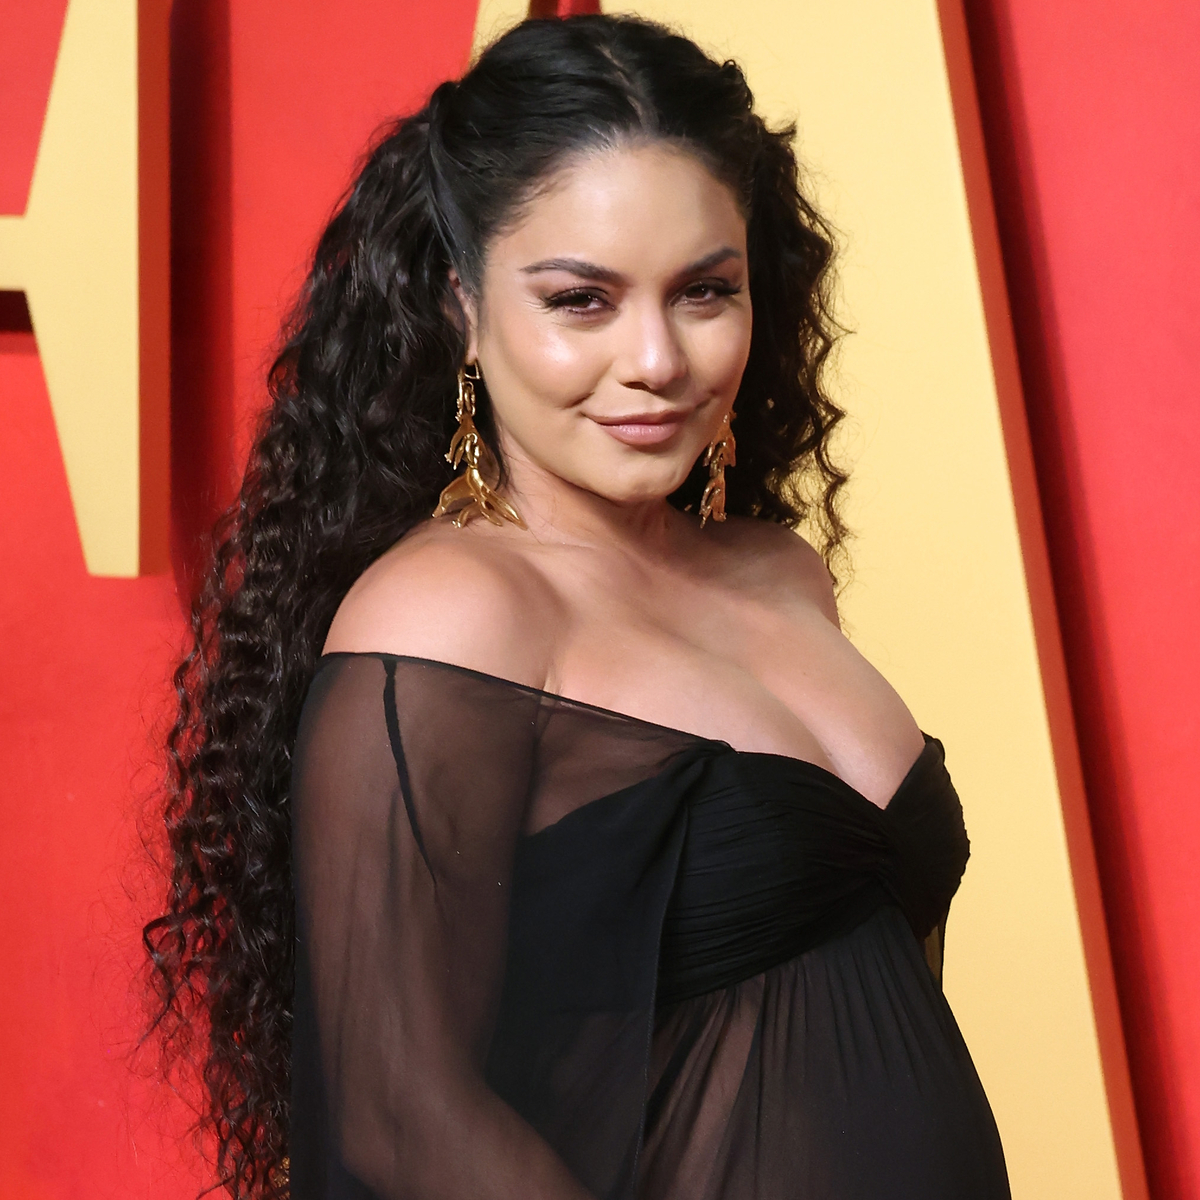 Proof Pregnant Vanessa Hudgens Won’t Be Sticking to Status Quo After Welcoming Baby